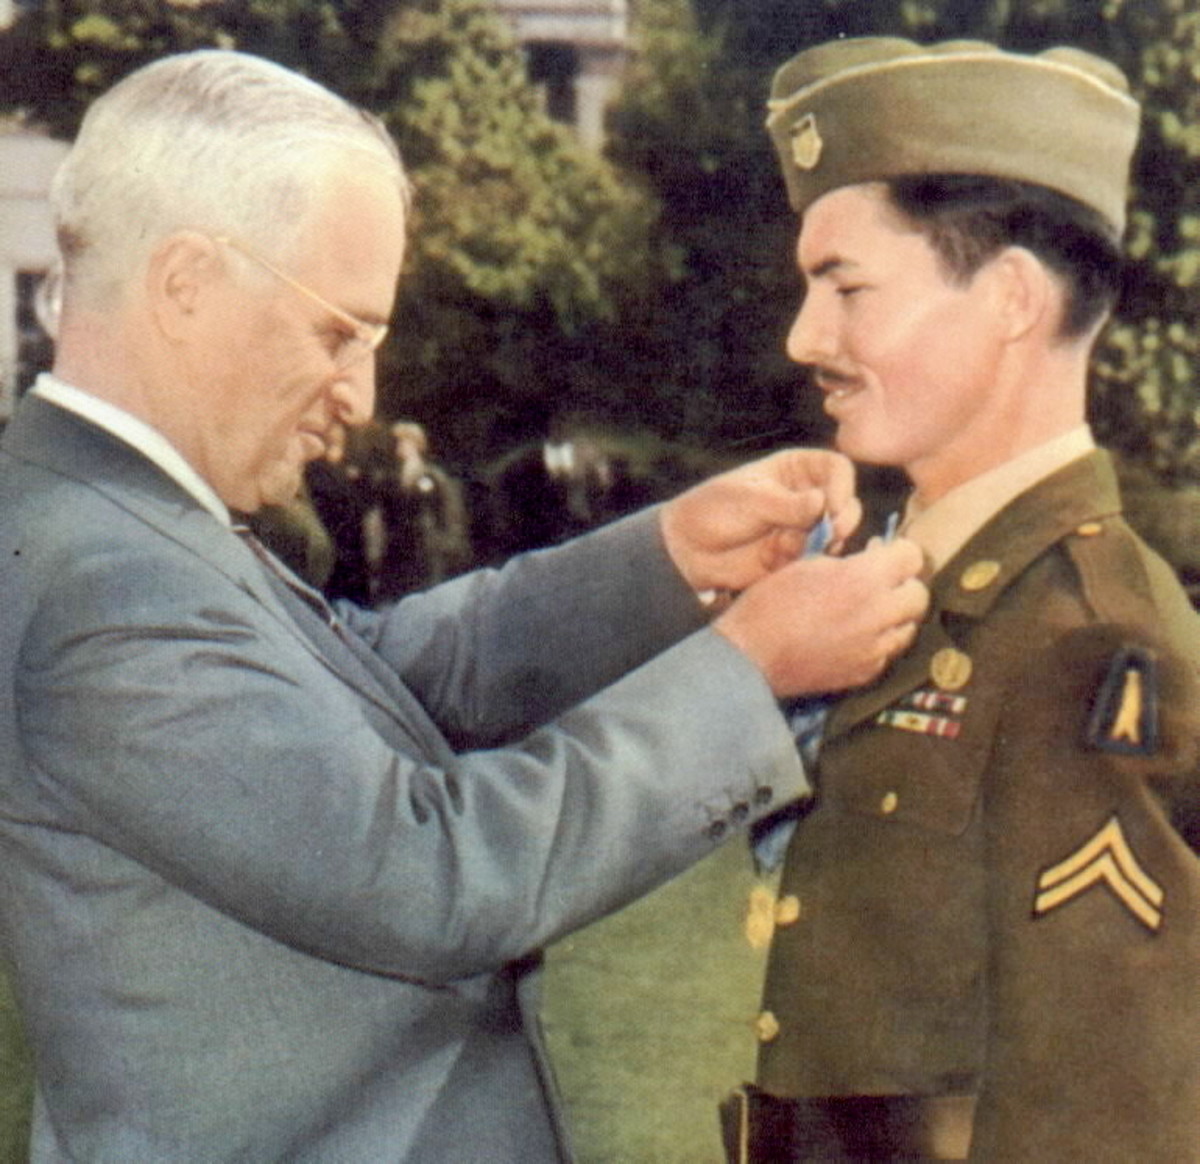 Picture of Desmond Doss receiving the Medal of Honor from President Harry Truman.